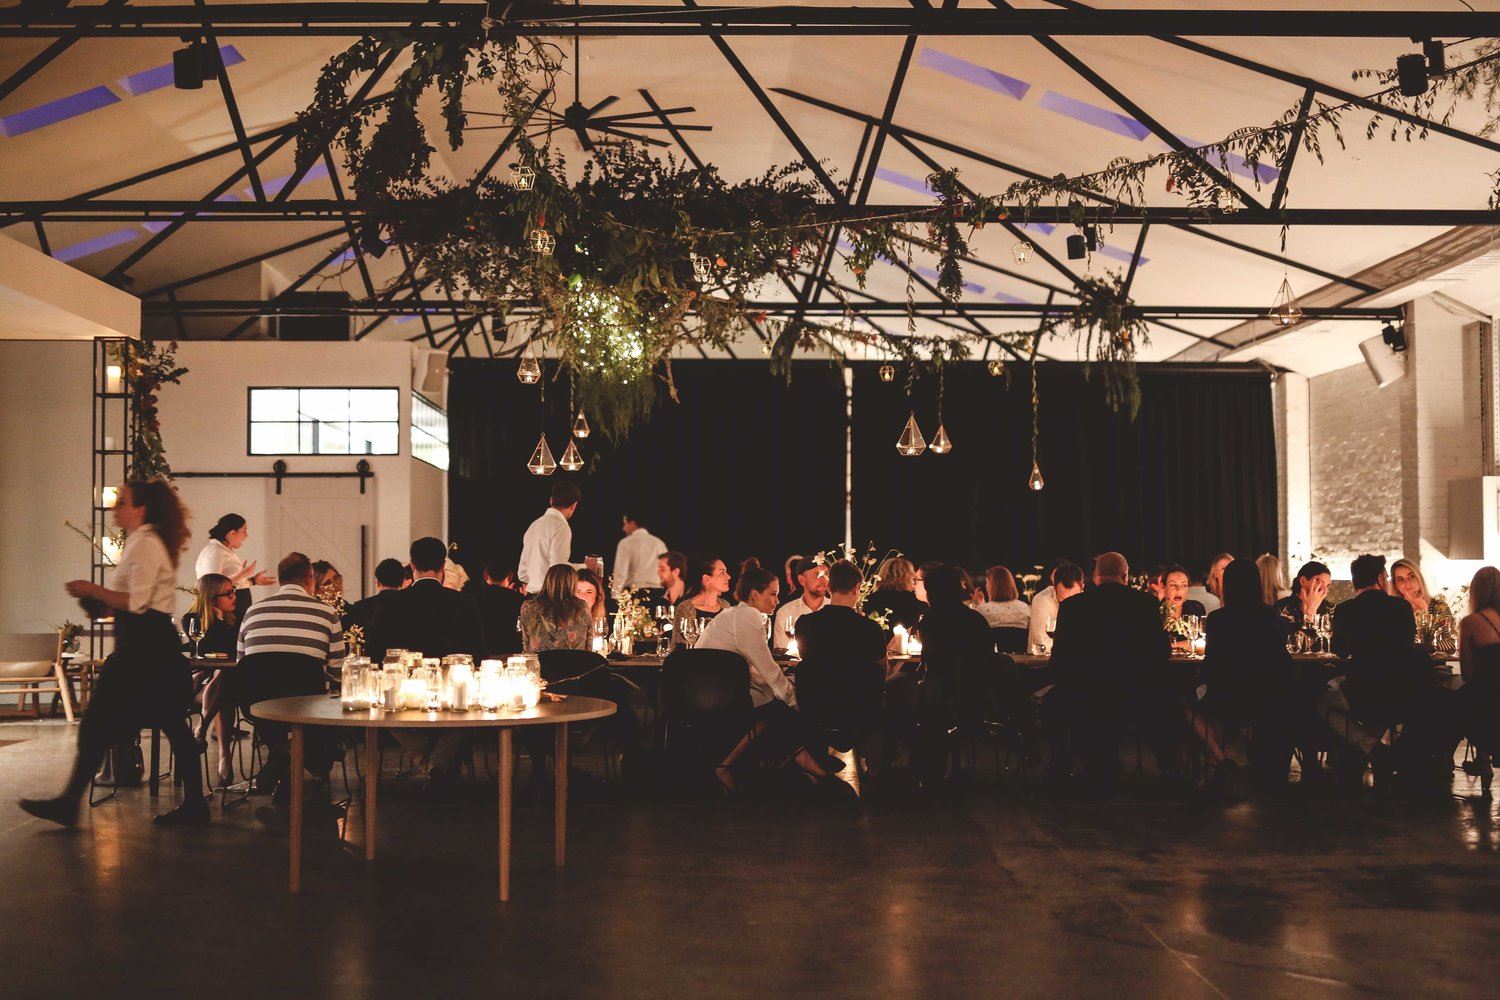 A lively scene at a dinner party venue in Melbourne, as a multitude of people gather around tables in a spacious room, enjoying each other's company.